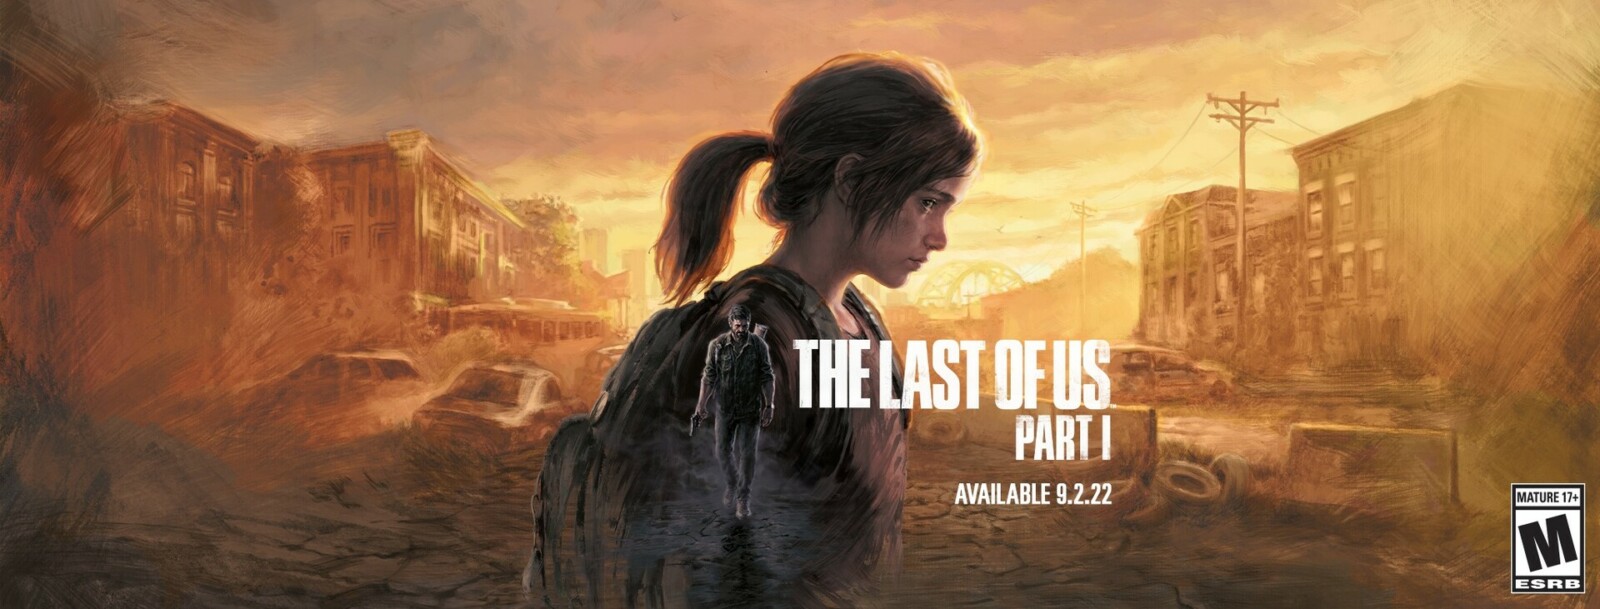 The Last of Us Part I (Remake) Official Key Art